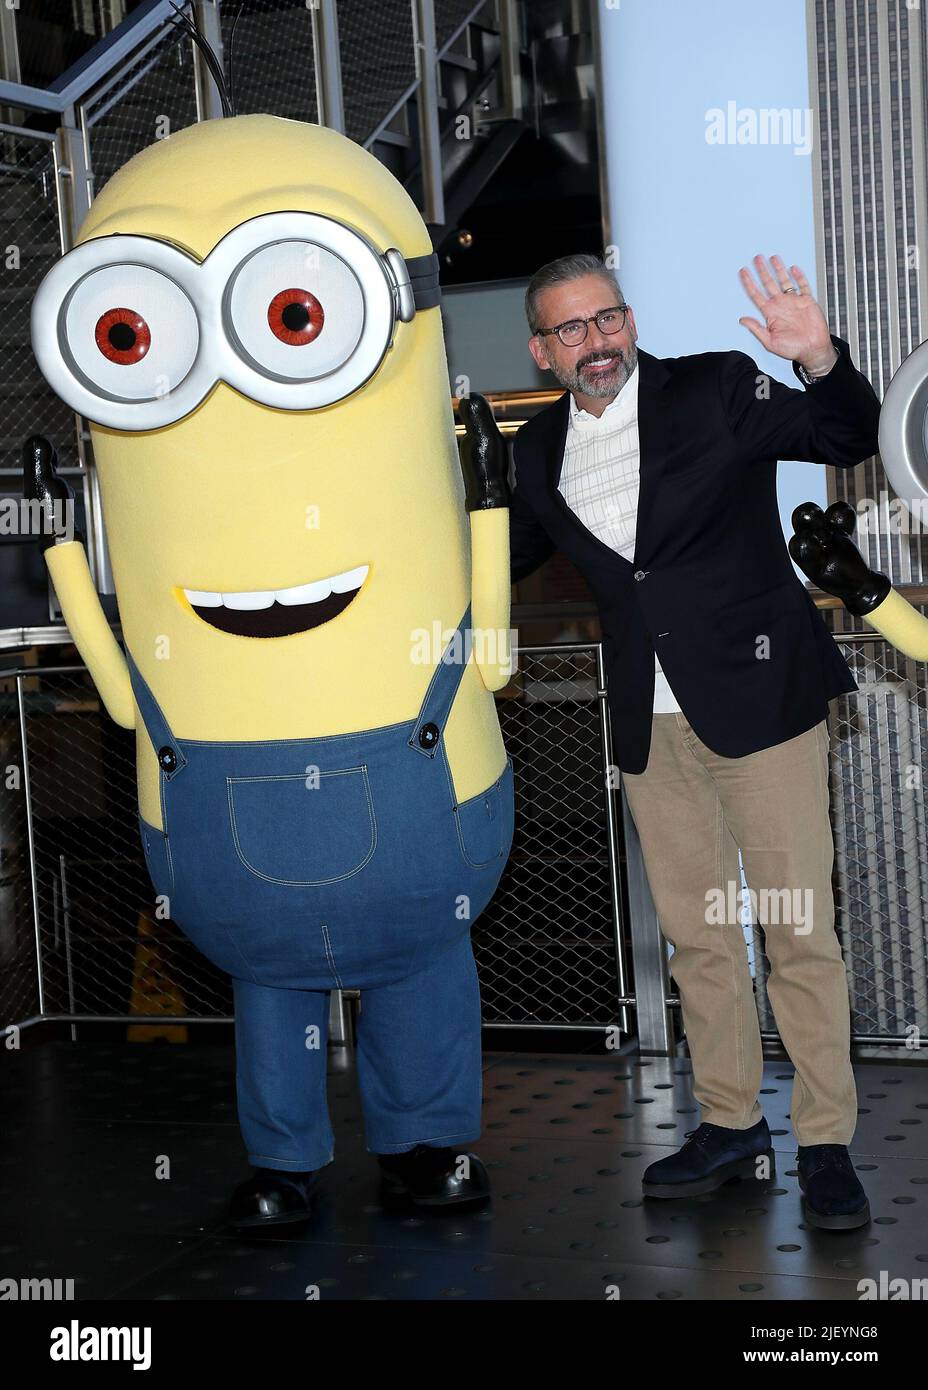 New York, NY, USA. 28th June, 2022. Kevin the Minion, Steve Carell celebrating the upcoming premiere of Minions: The Rise of Gru at The Empire State Building. Credit: Steve Mack/Alamy Live News Stock Photo